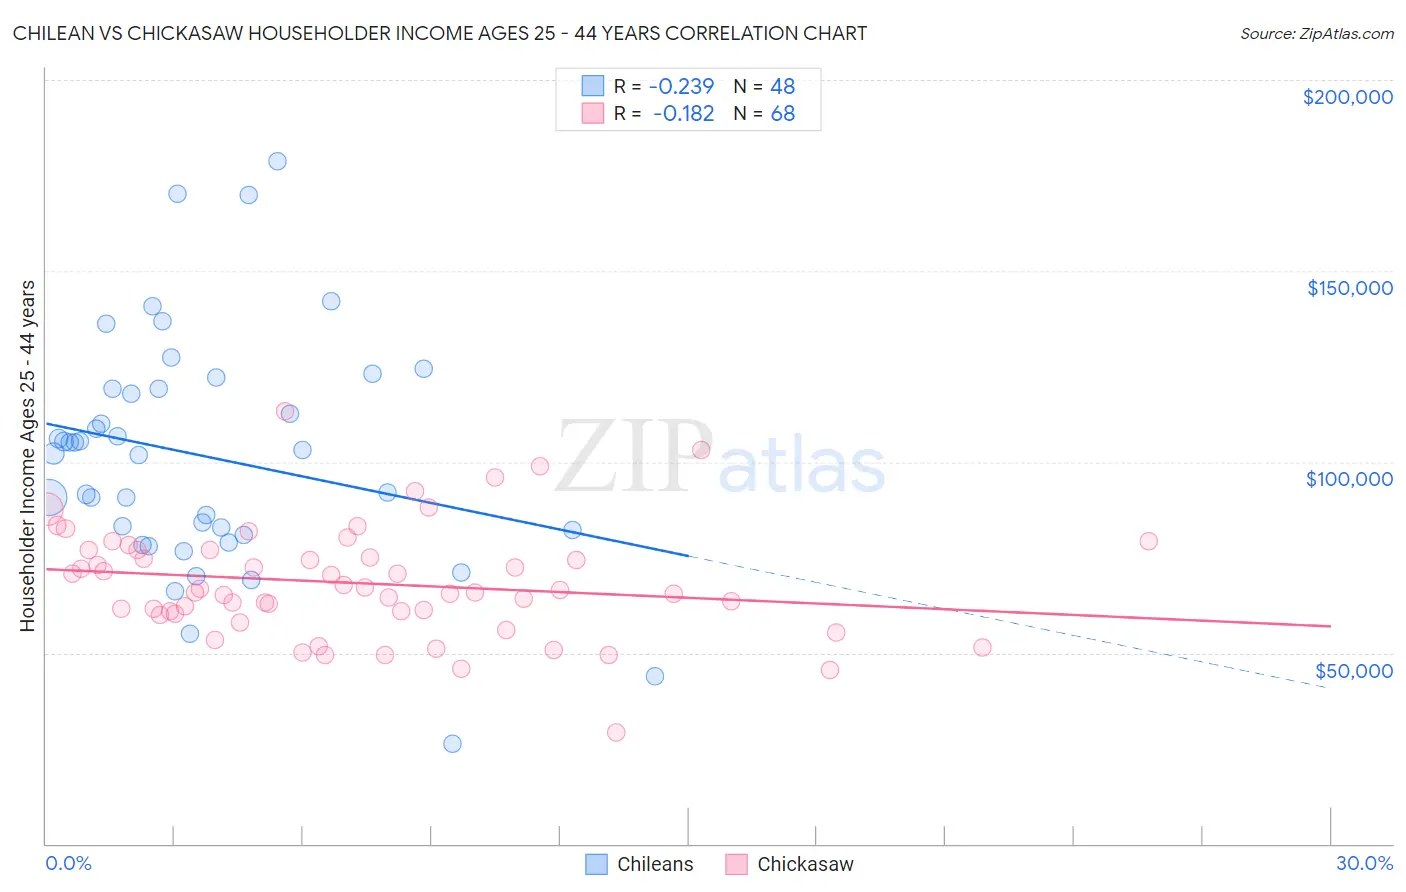 Chilean vs Chickasaw Householder Income Ages 25 - 44 years